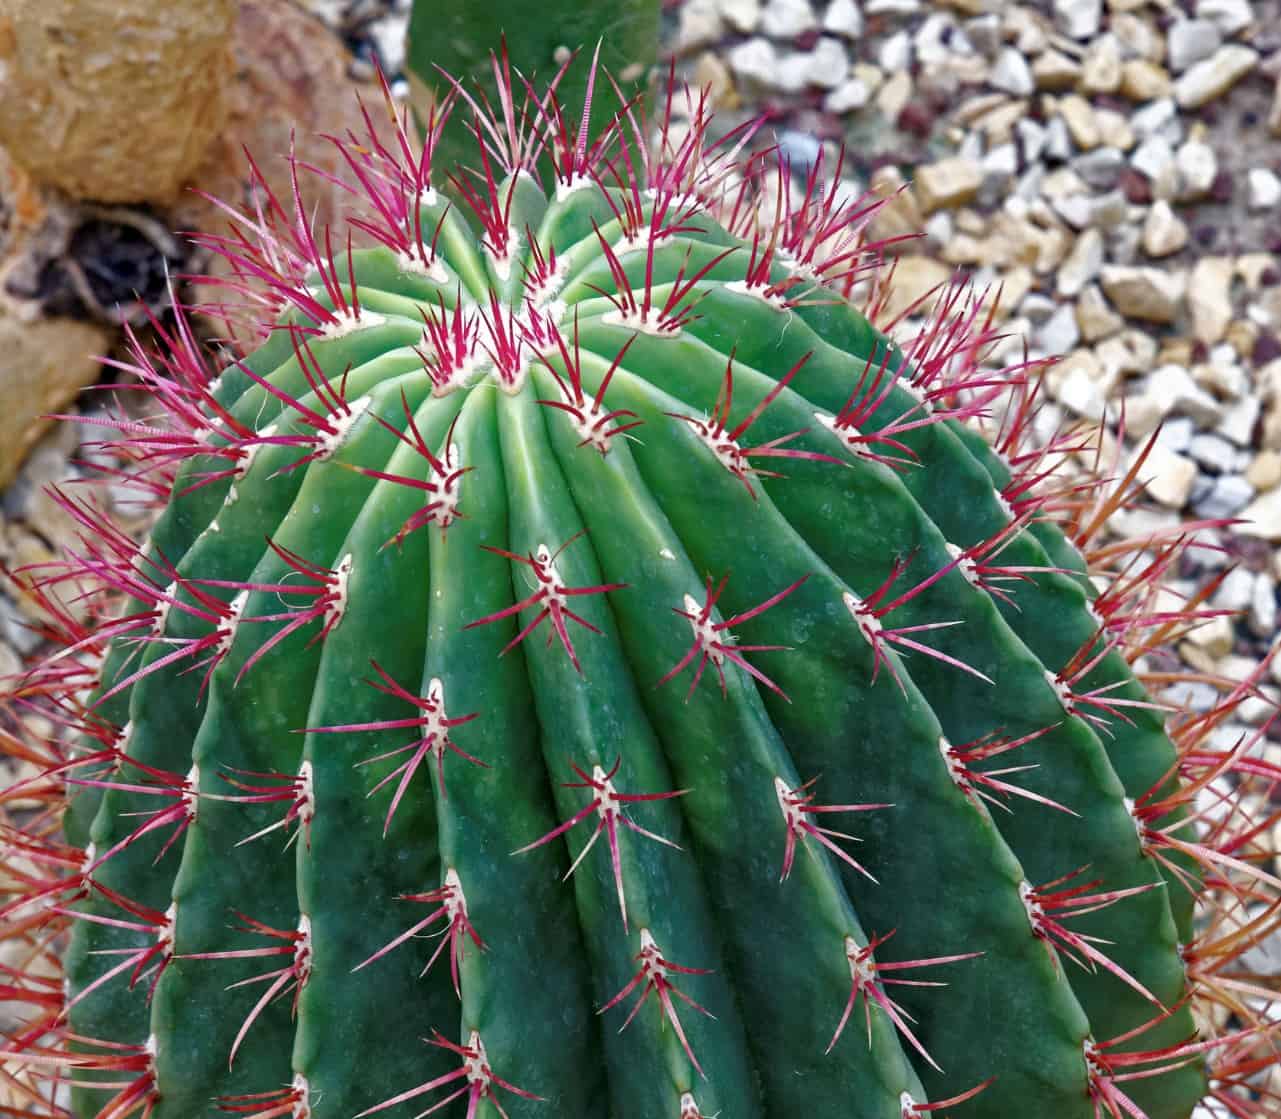 The Mexican lime cactus has red spines.